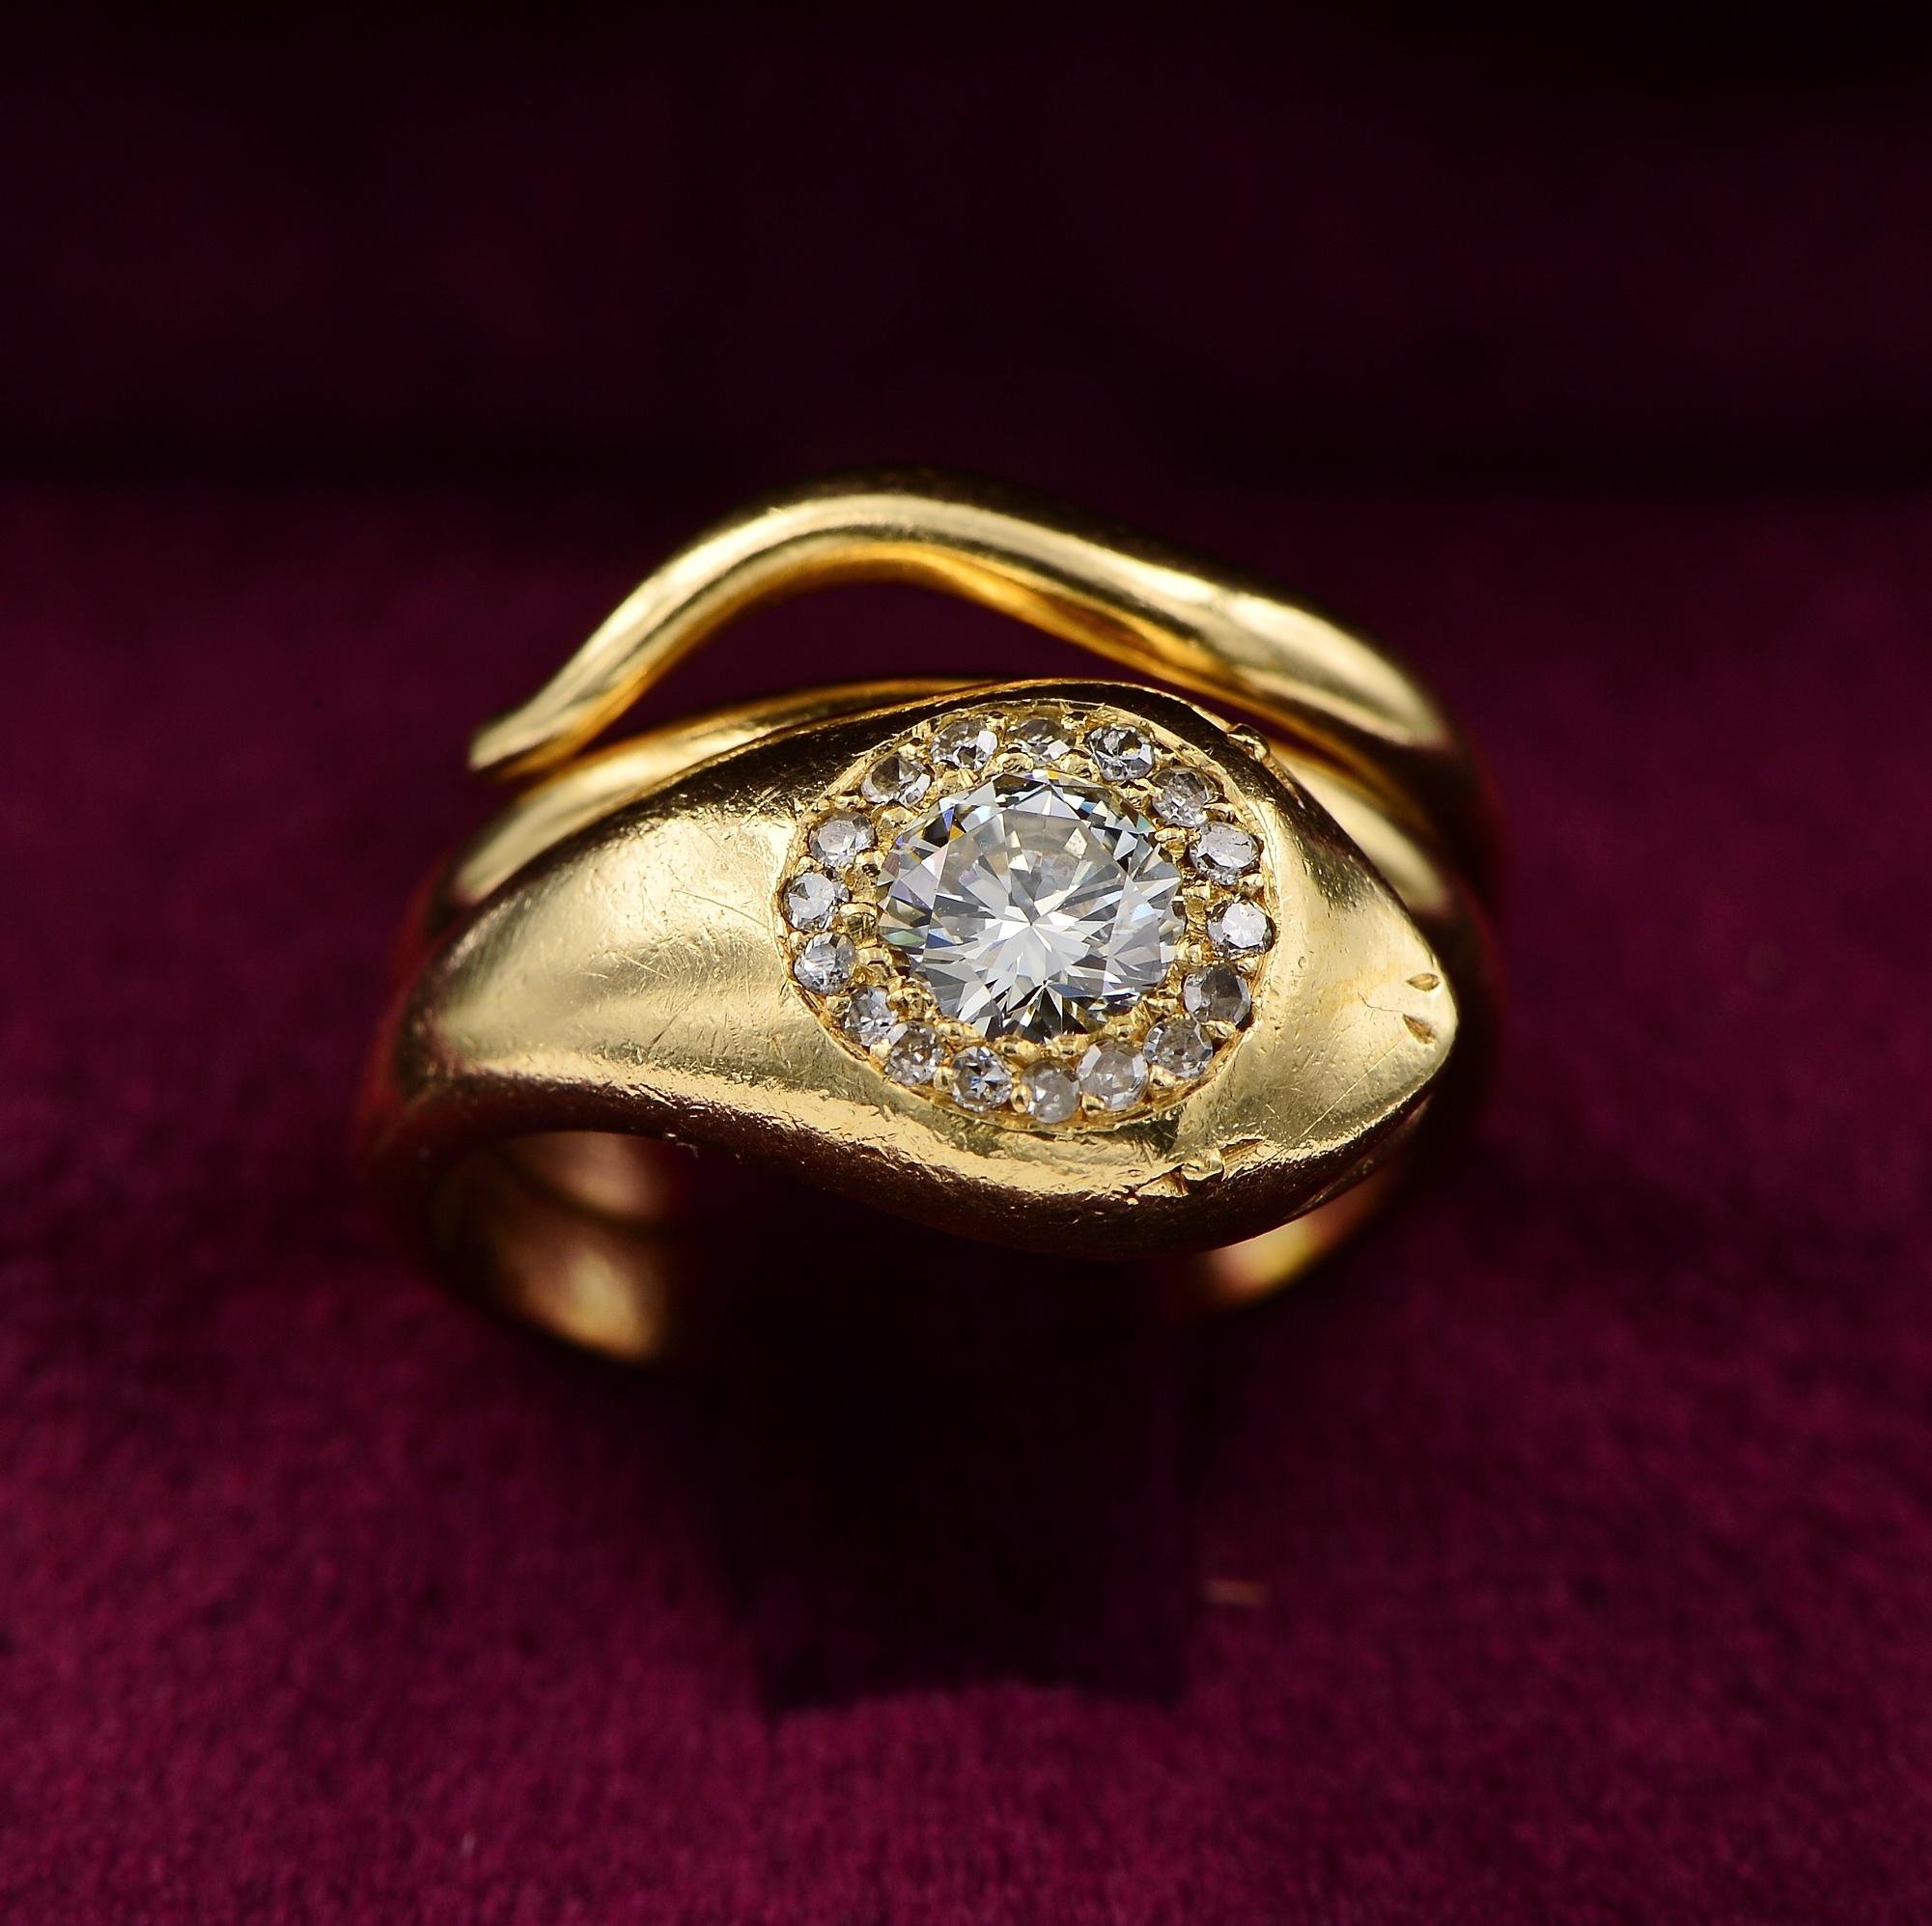 Popular throughout history, meaningful love token, snakes represent eternity and symbolic for many cultures
This beautiful vintage coiled snake Diamond ring is 1920 ca, hand crafted of solid 18 Kt gold
Jewelled head holding a primitive early